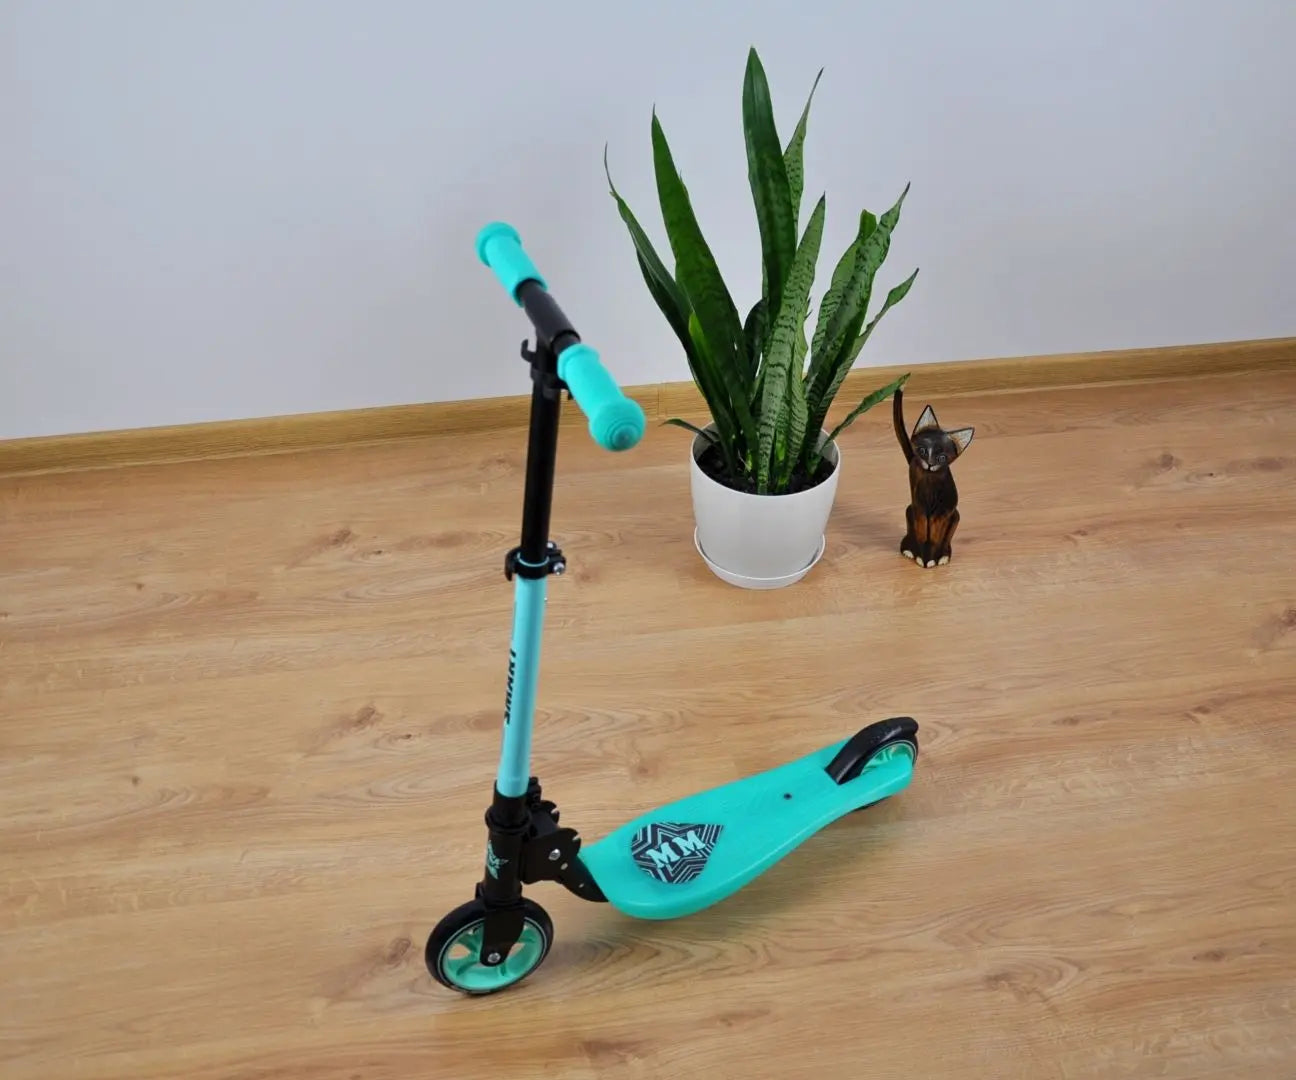 A lightweight and foldable Scooter SMART in green, featuring adjustable handlebars, ABEC-5 bearings, PU wheels, and a maximum weight capacity of 50 kg. Weighs 4.03 kg.